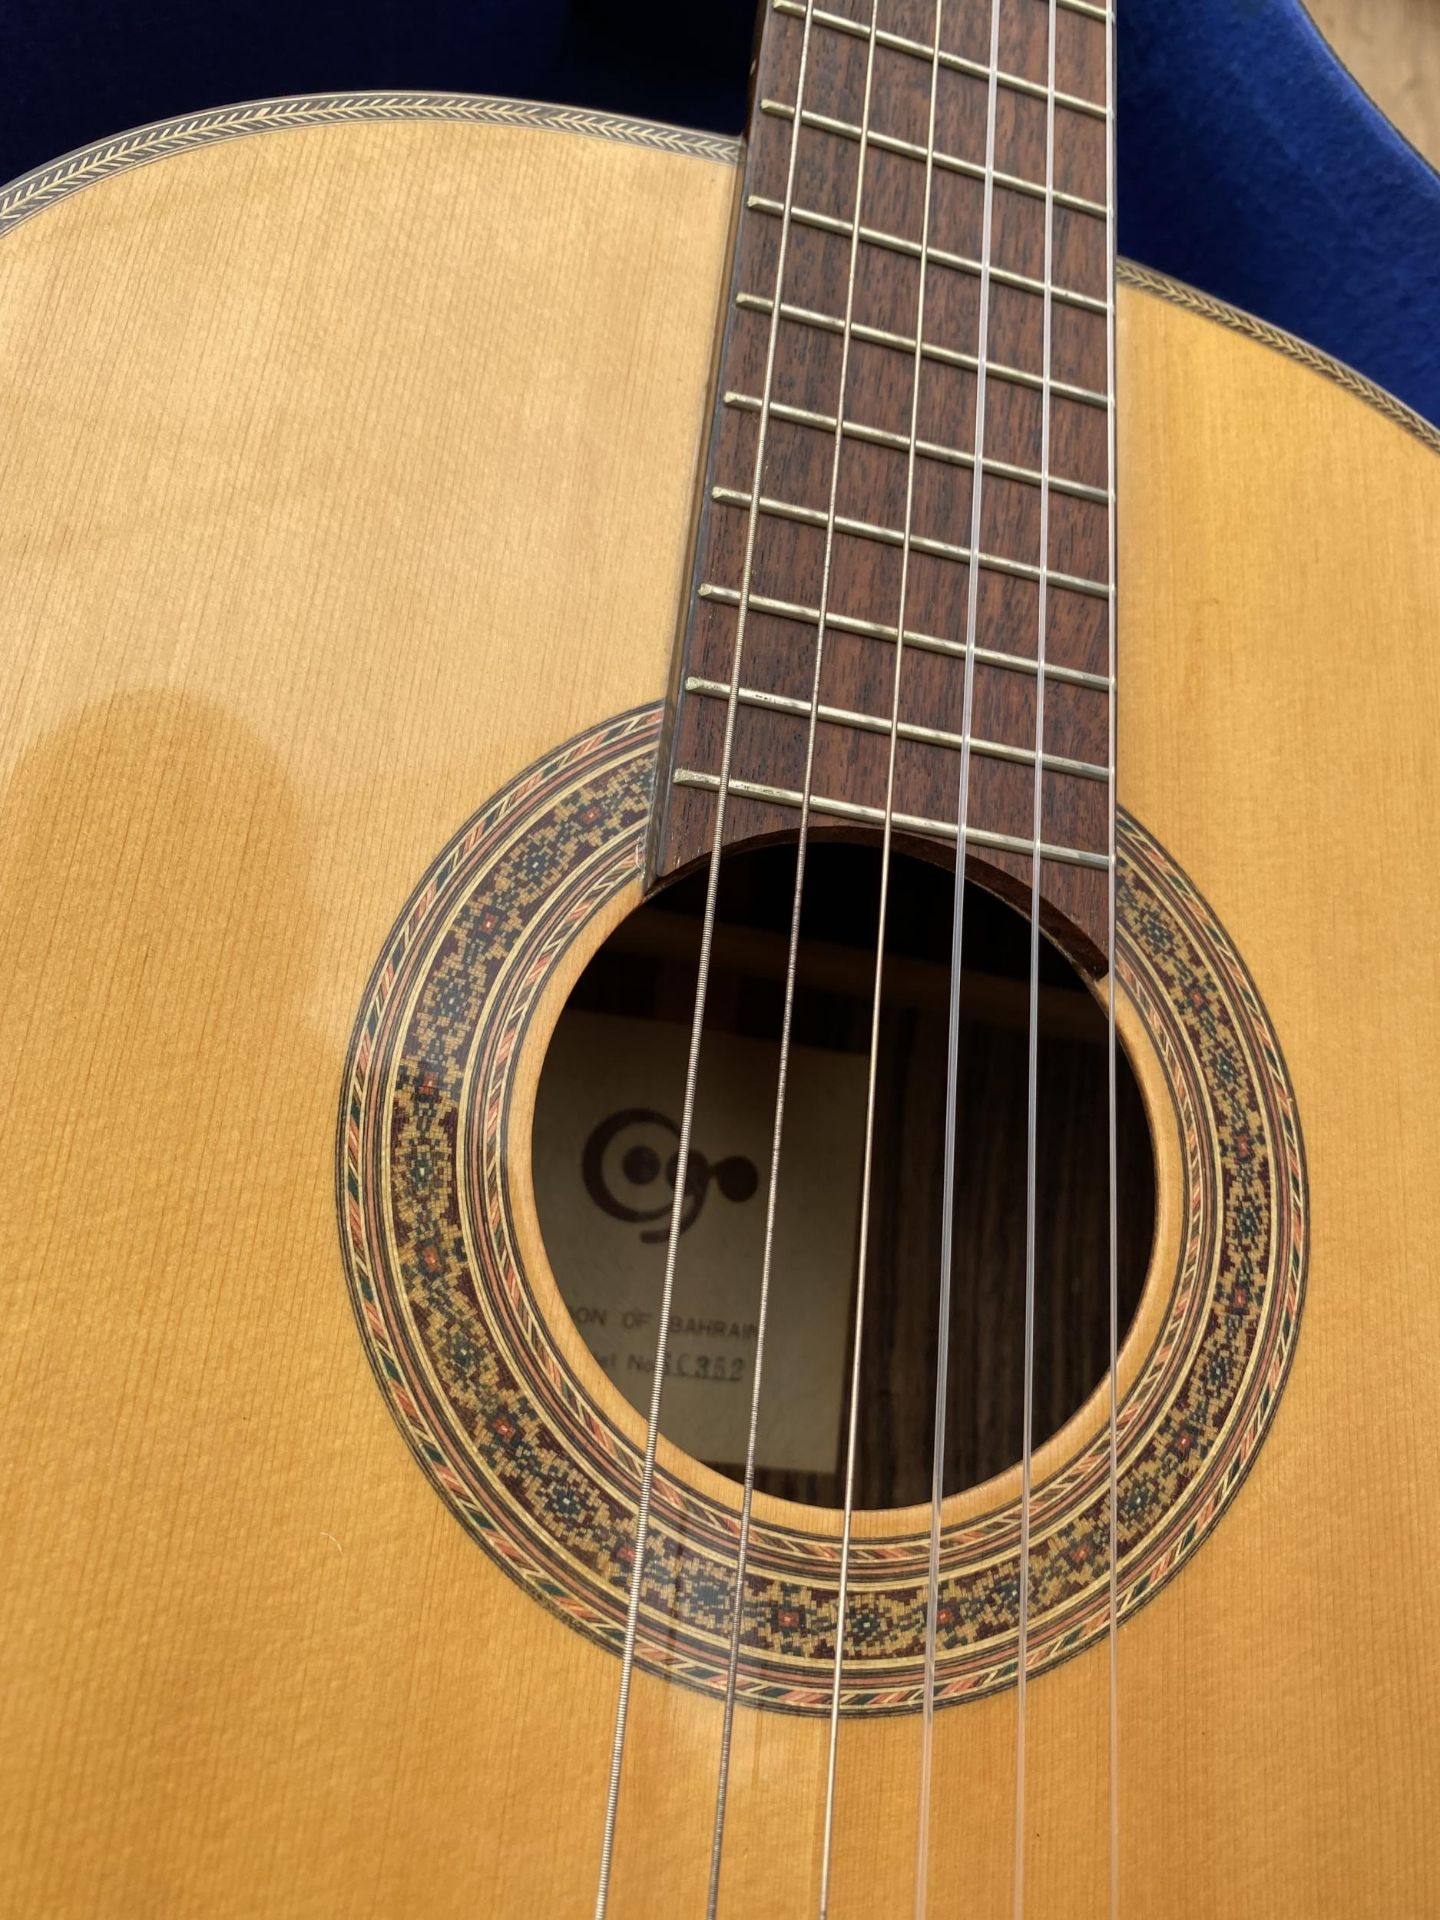 A MOON OF BAHRAIN MODEL NO.SC352 ACOUSTIC GUITAR AND CARRY CASE - Image 6 of 9